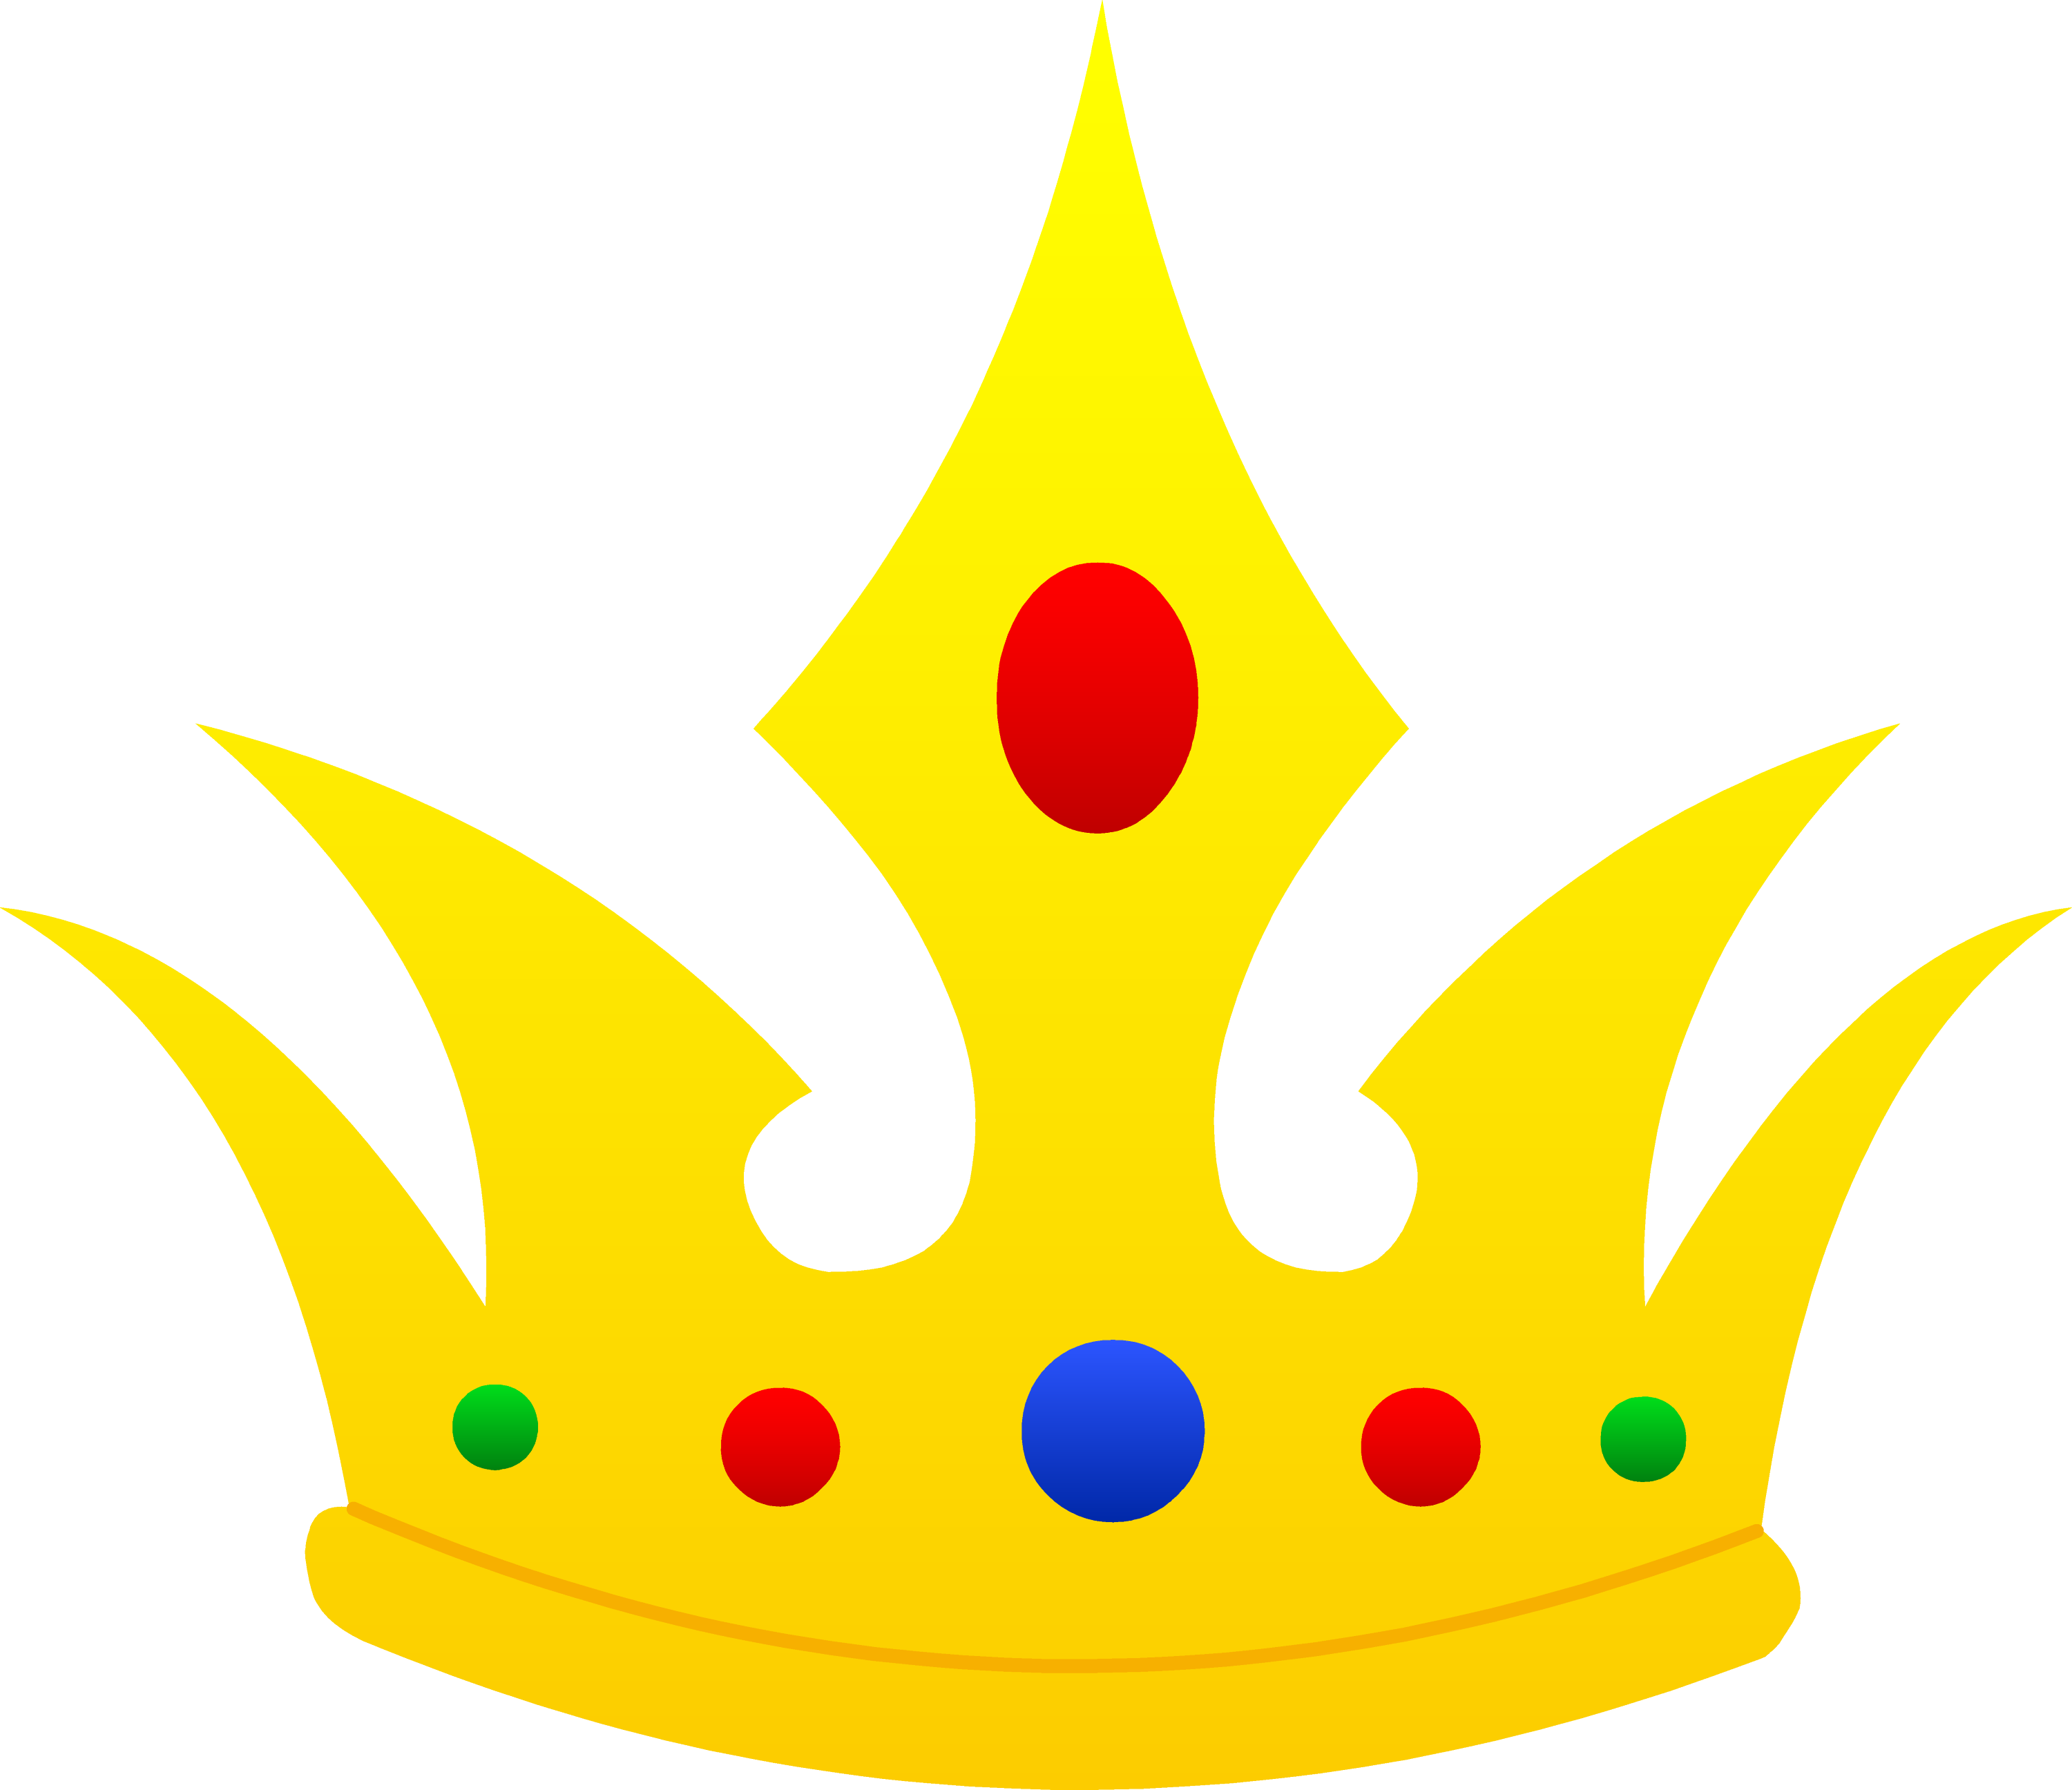 free clipart images crowns - photo #18